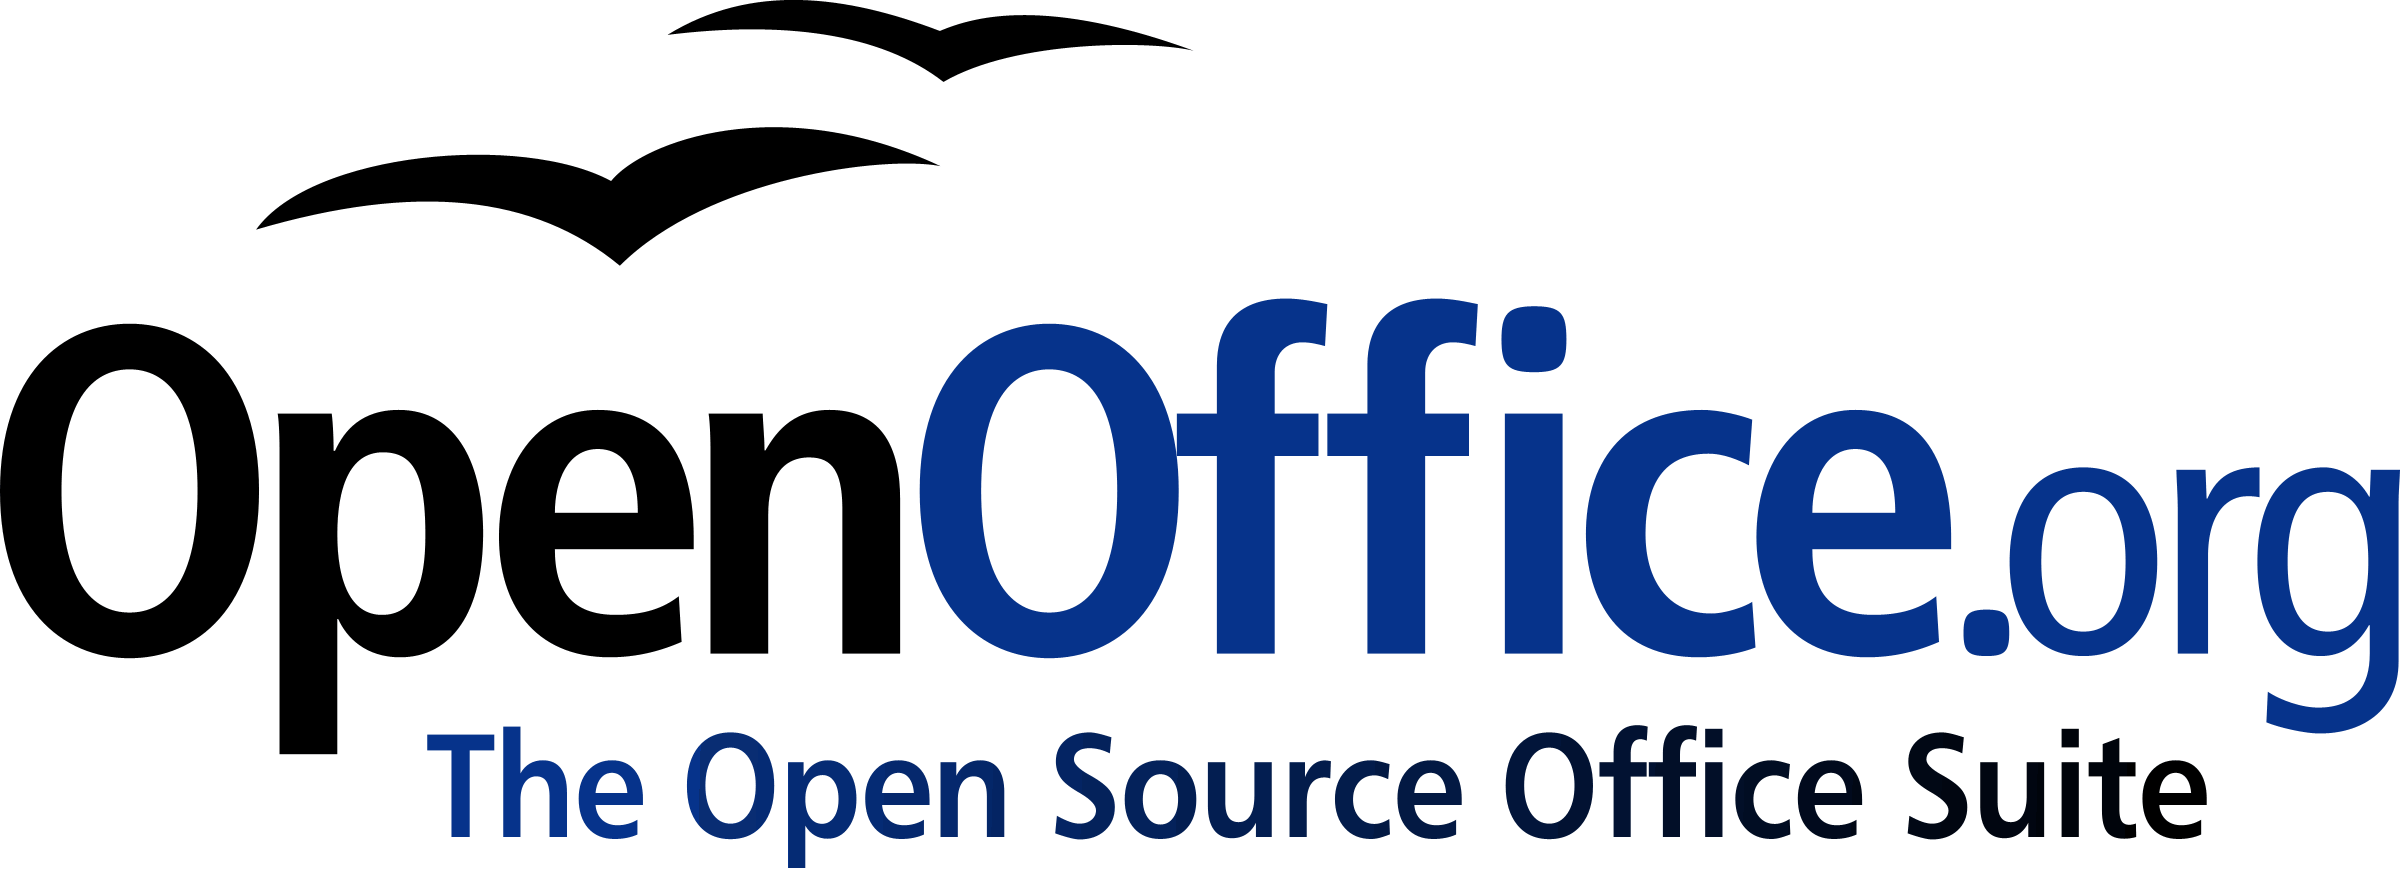 Nice Images Collection: OpenOffice.org Desktop Wallpapers